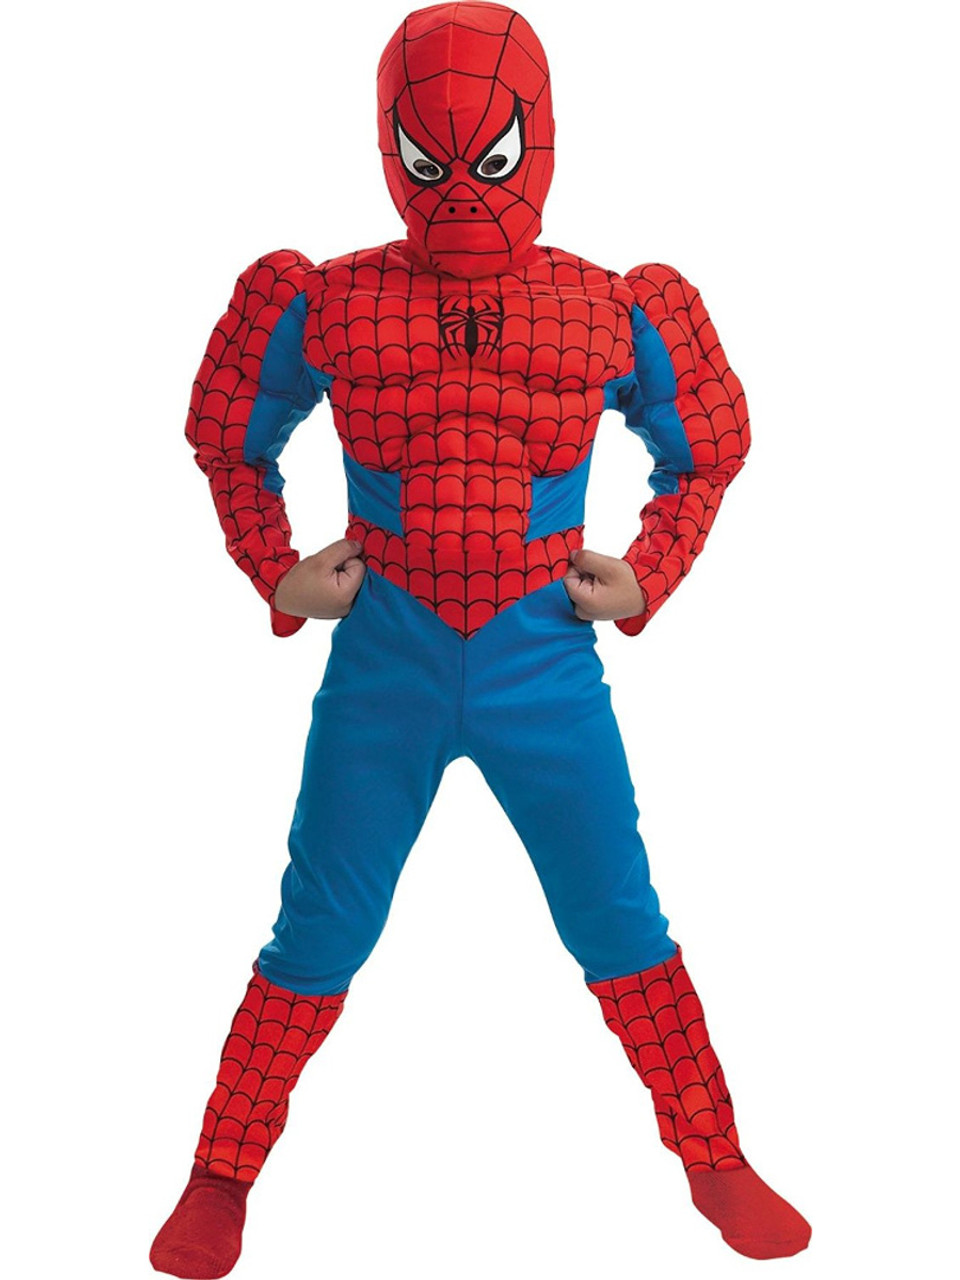 Spiderman Muscle Costume